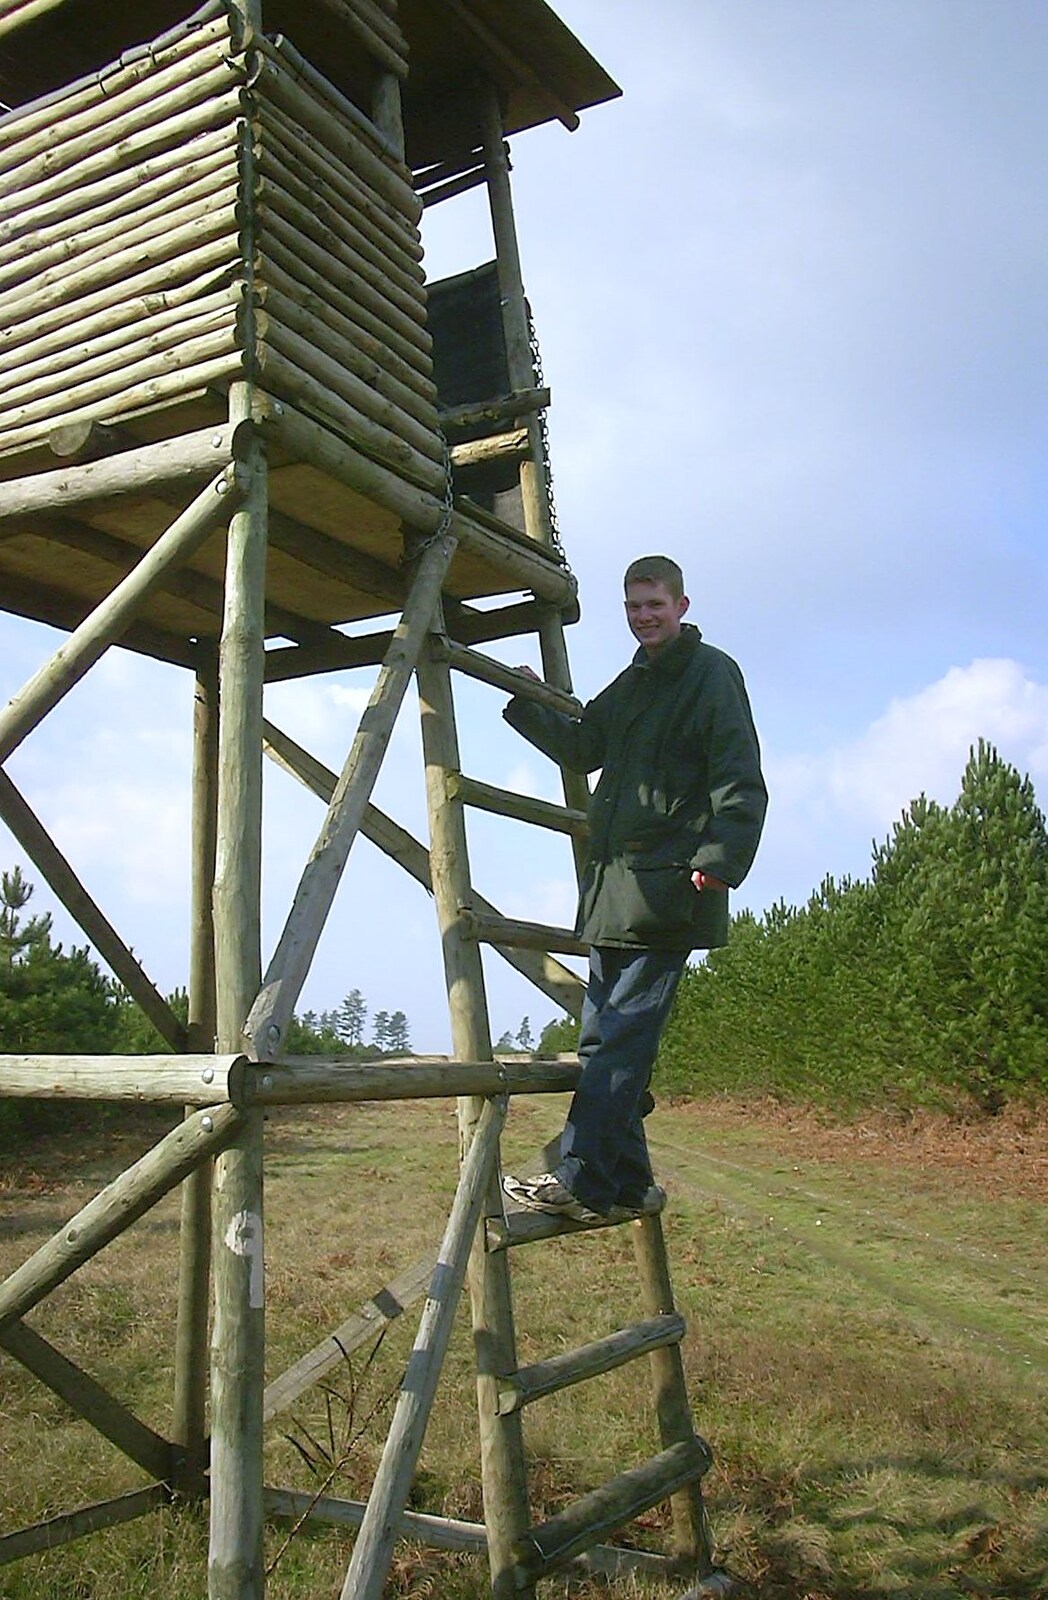 The Boy Phil climbs a tower from A day at the Husky Races, Lakenheath, Suffolk - 29th February 2004